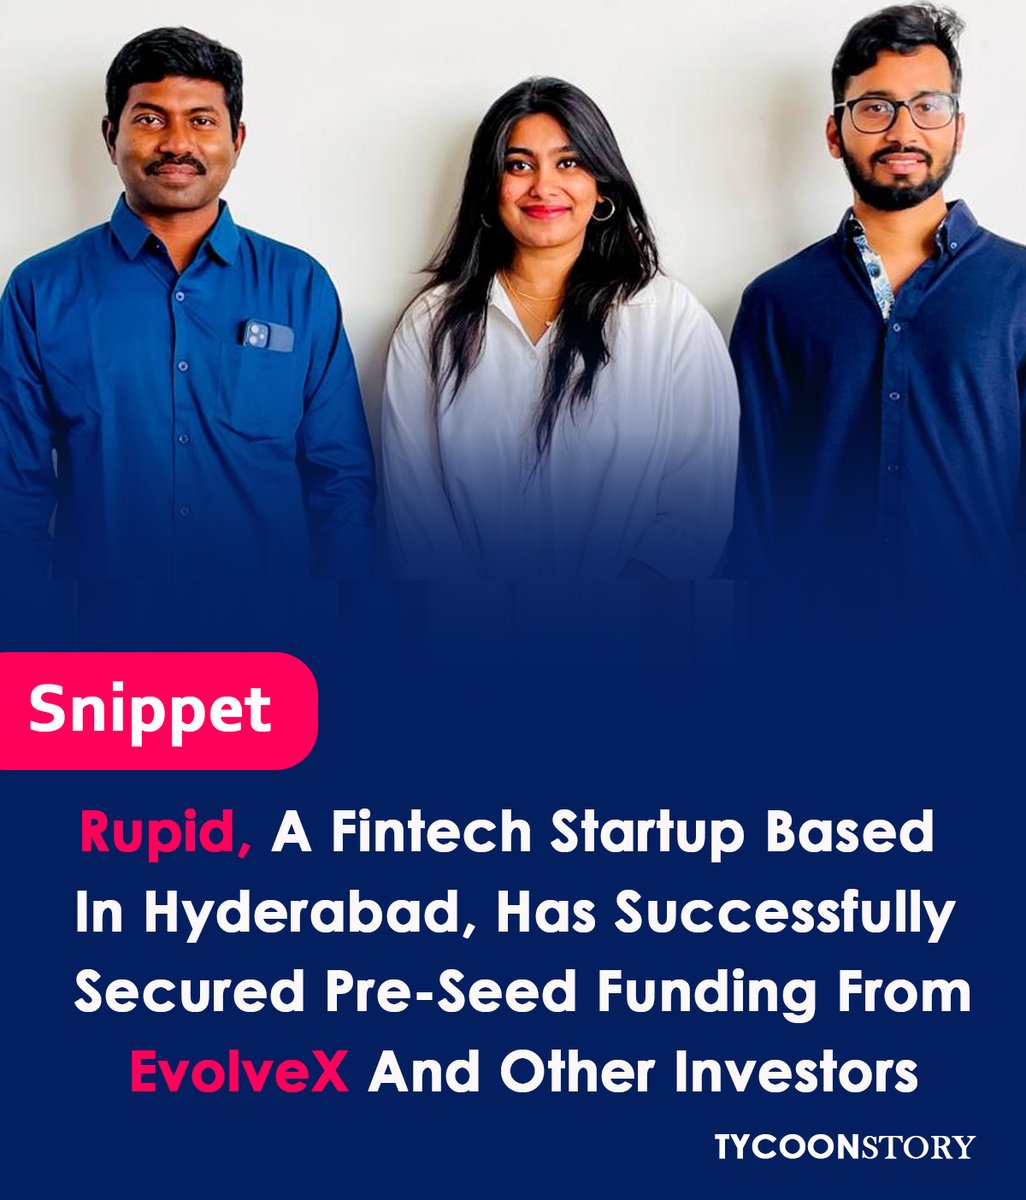 Rupid, A Fintech Startup In Hyderabad, Receives Pre-seed Funding From Evolvex And Other Sources. 
#fintech #startup #hyderabad #preseedfunding #evolvex #employeebenefits #earnedwageaccess #startupindia #startupnews #innovation #entrepreneurship #funding @EvolveXbyWFC